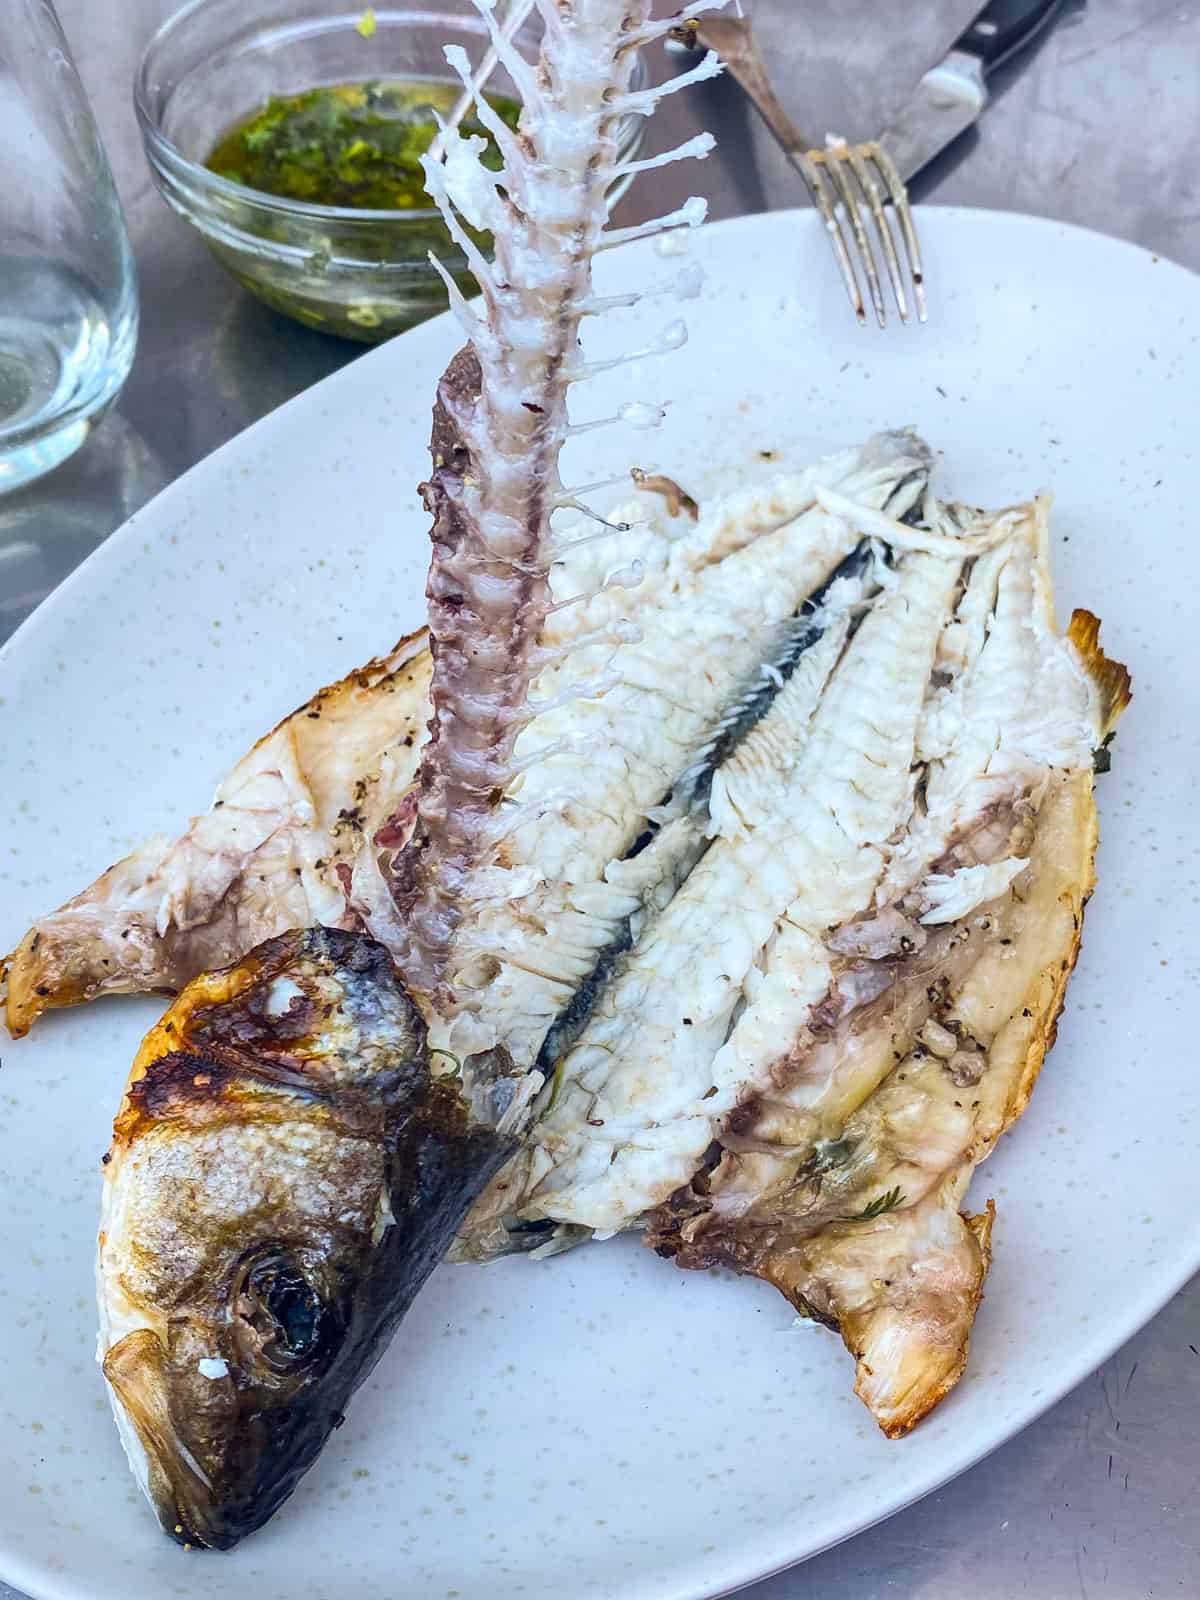 Remove the spine from the grilled branzino.